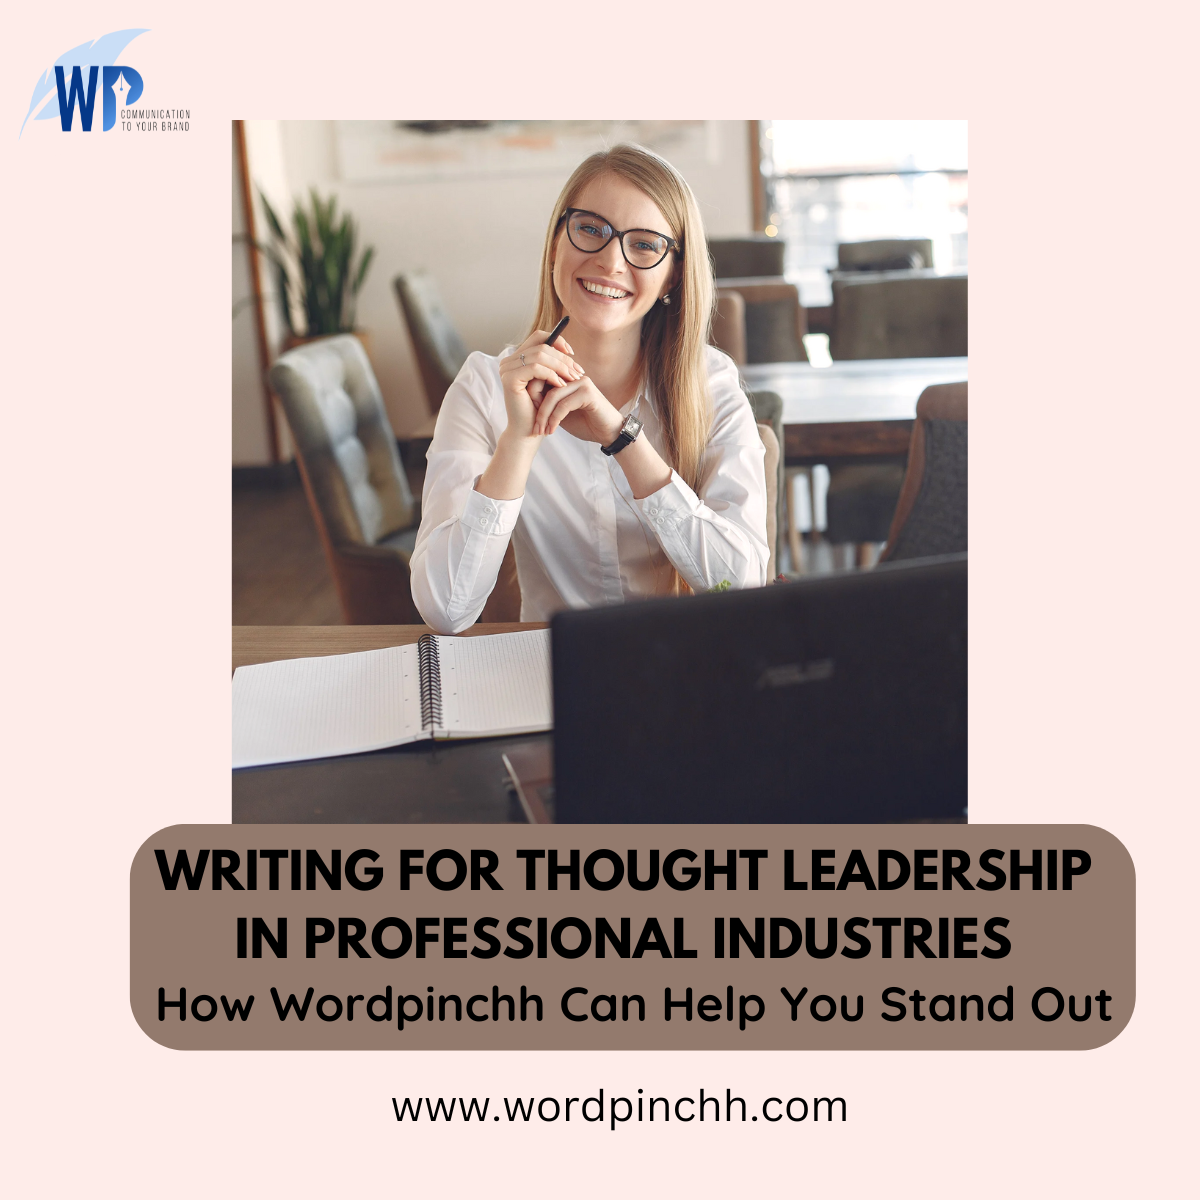 Writing for Thought Leadership in Professional Industries: How Wordpinchh Can Help You Stand Out